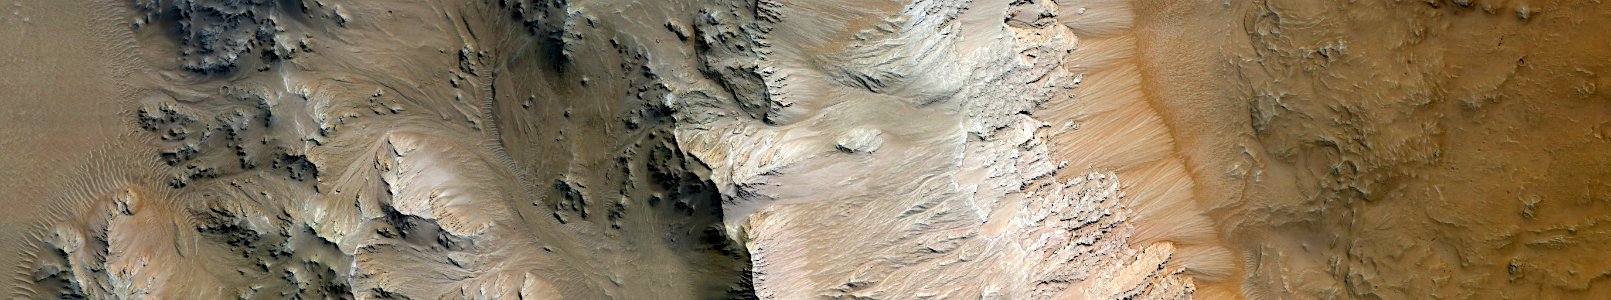 Mars - South Rim Gullied Slope of Mojave Crater photo